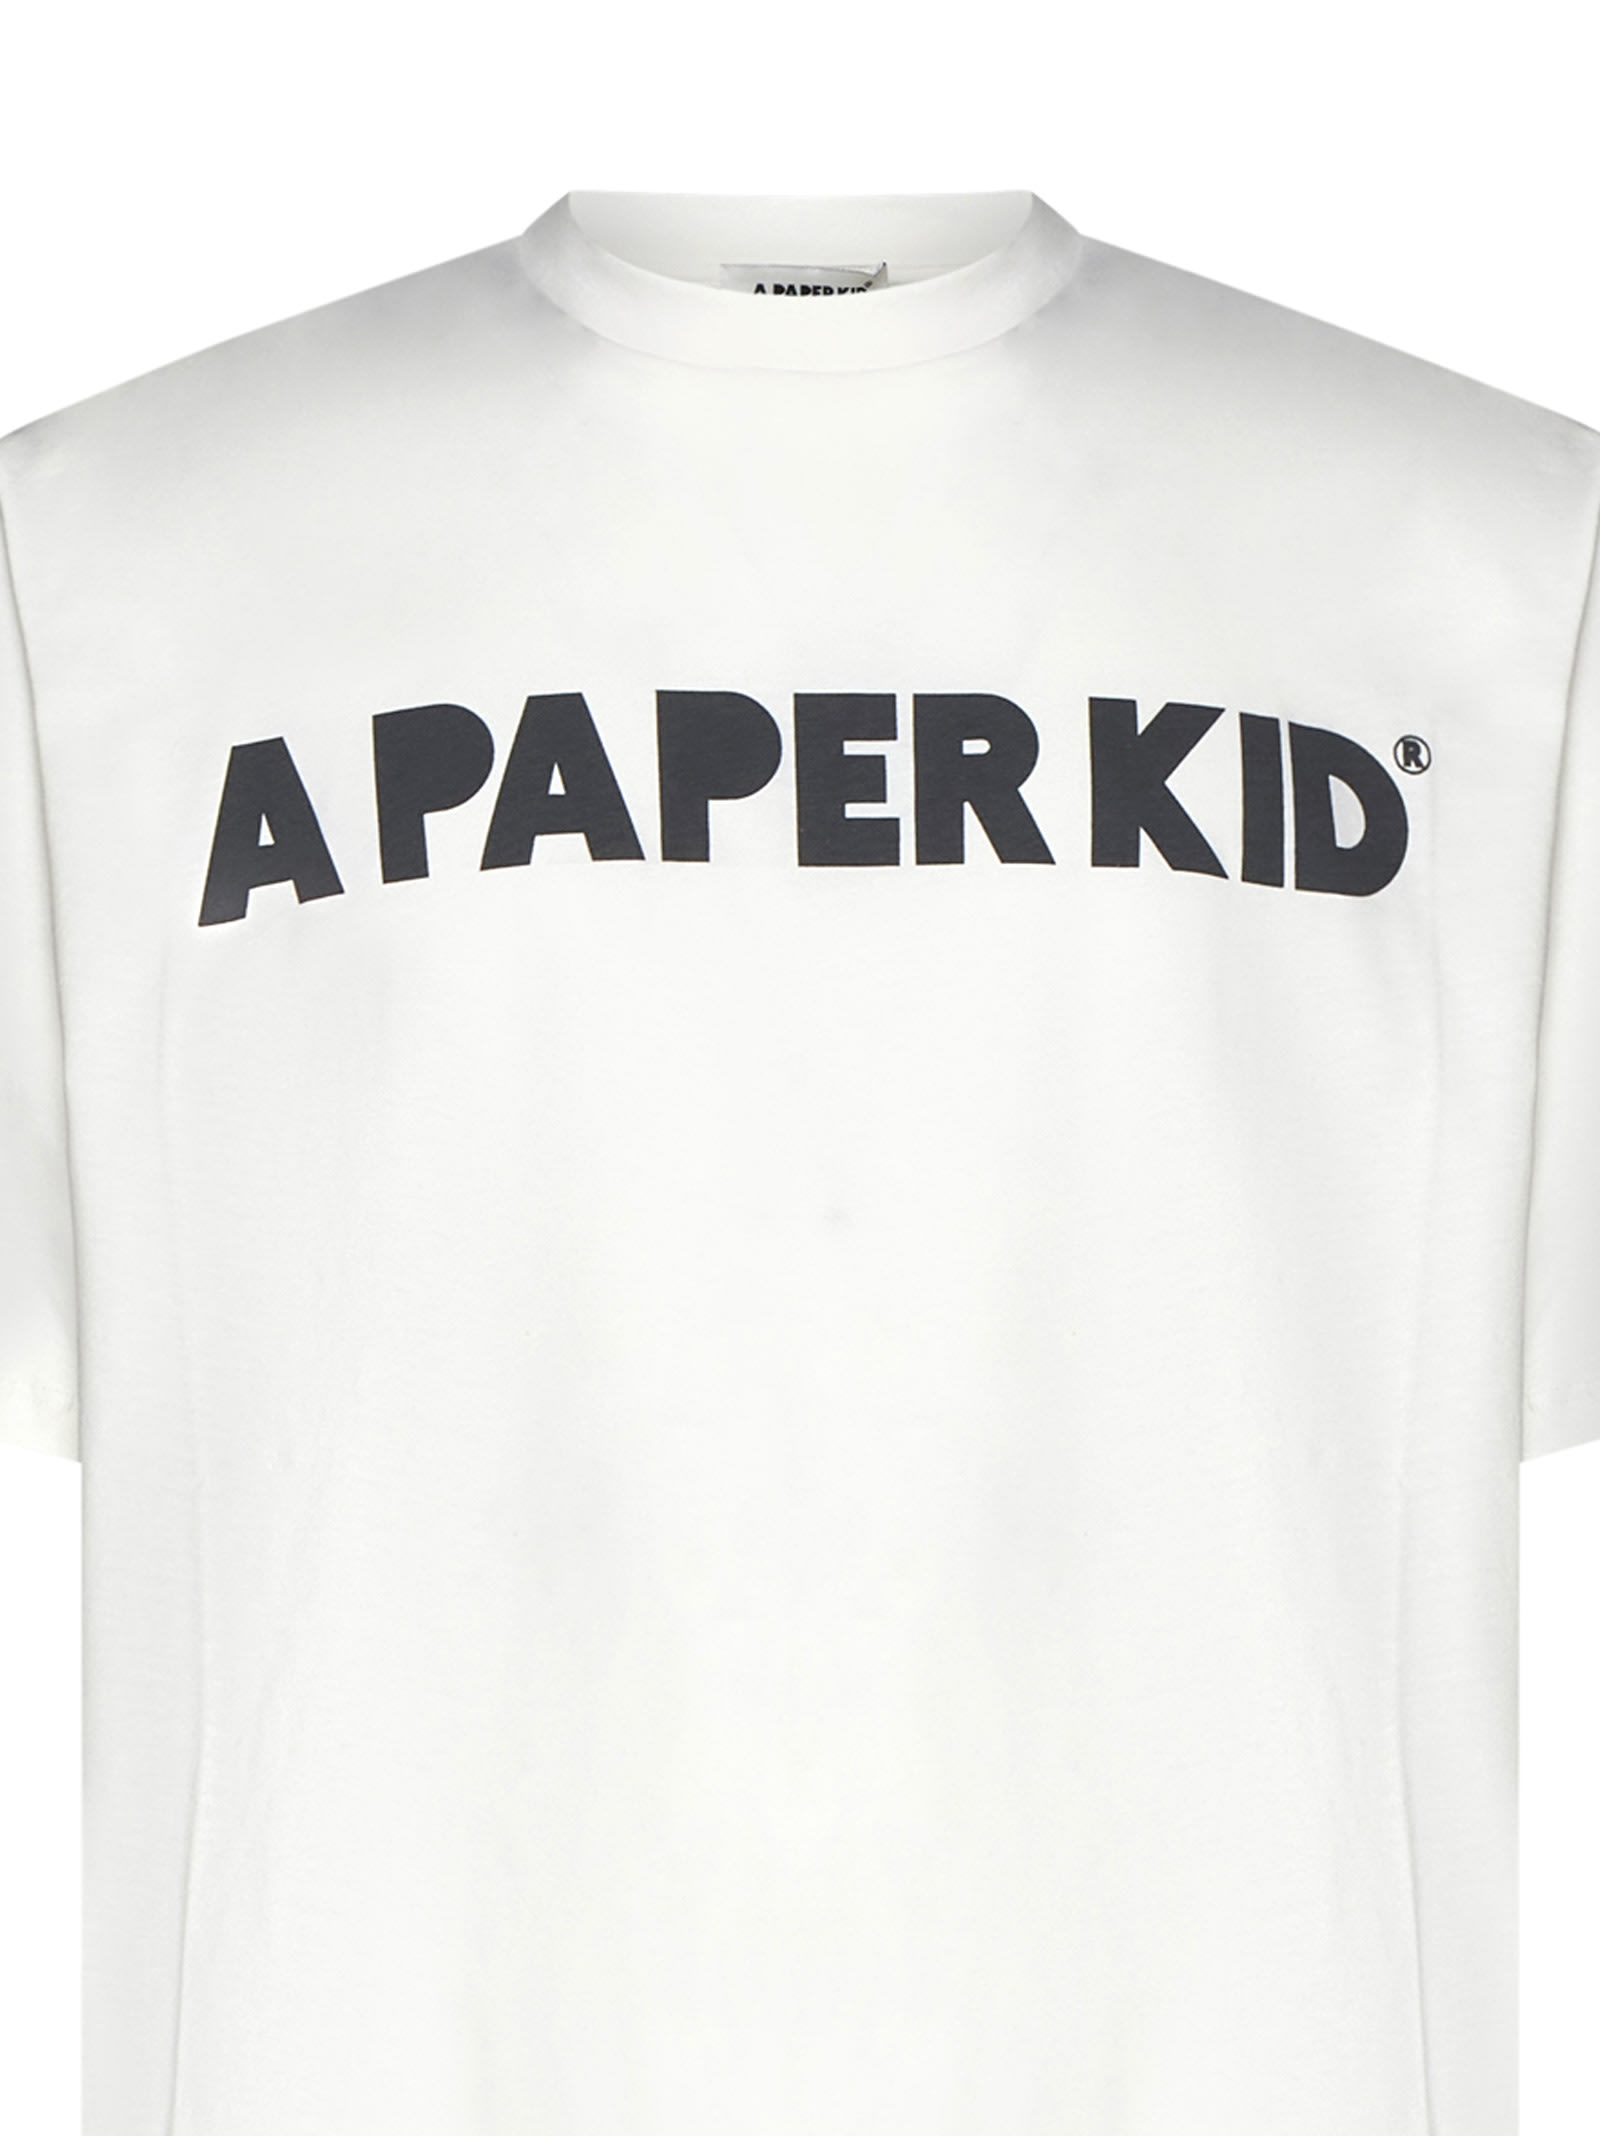 Shop A Paper Kid T-shirt In White